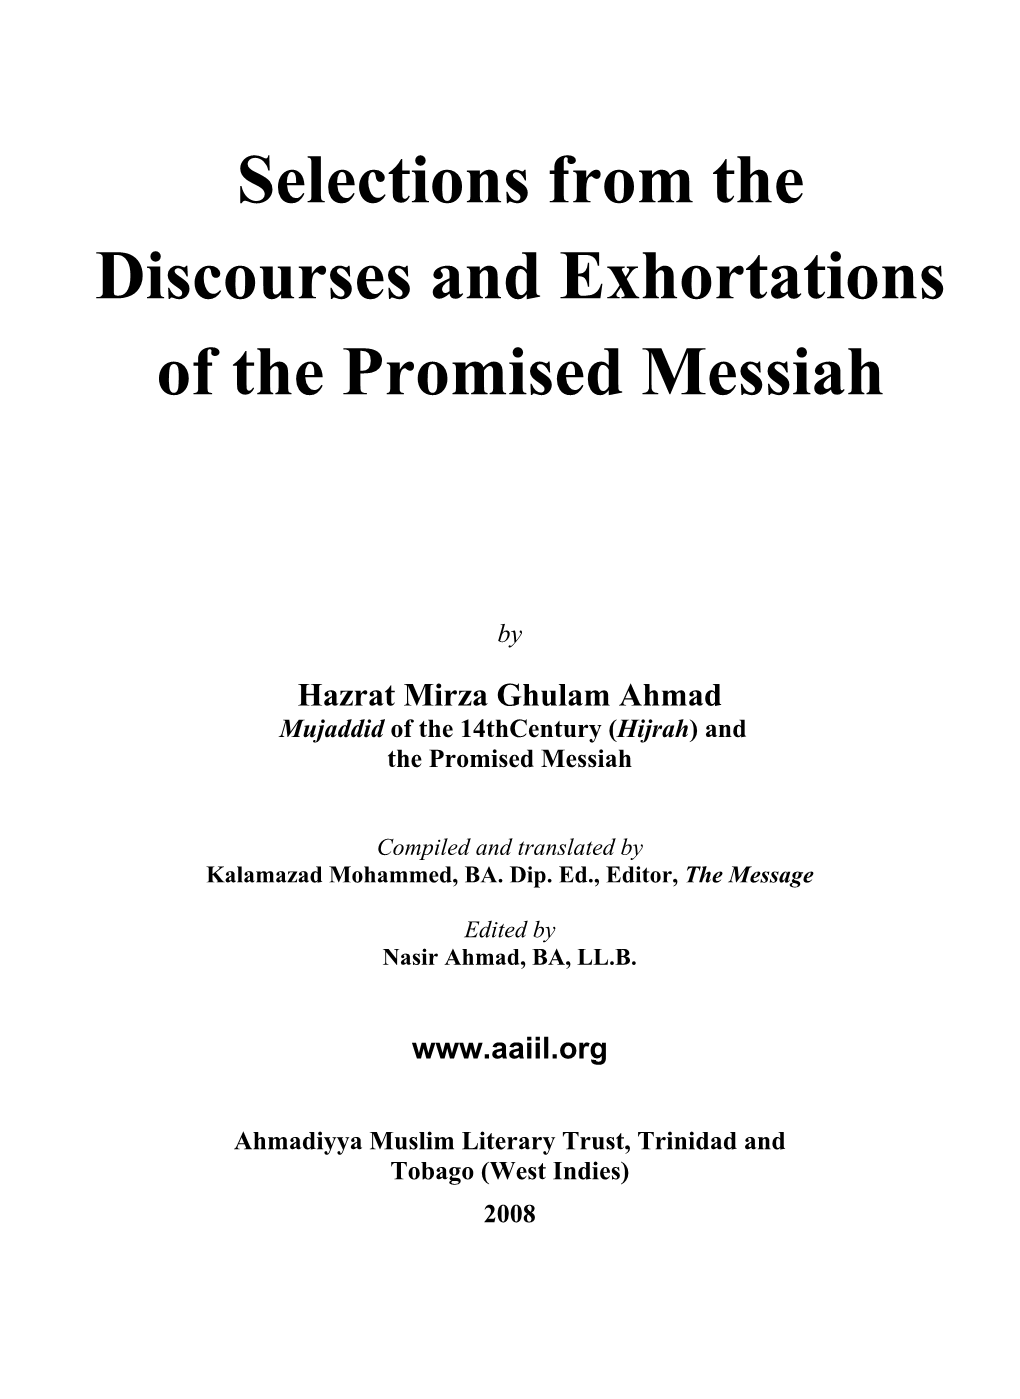 Selections from the Discourses and Exhortations of the Promised Messiah